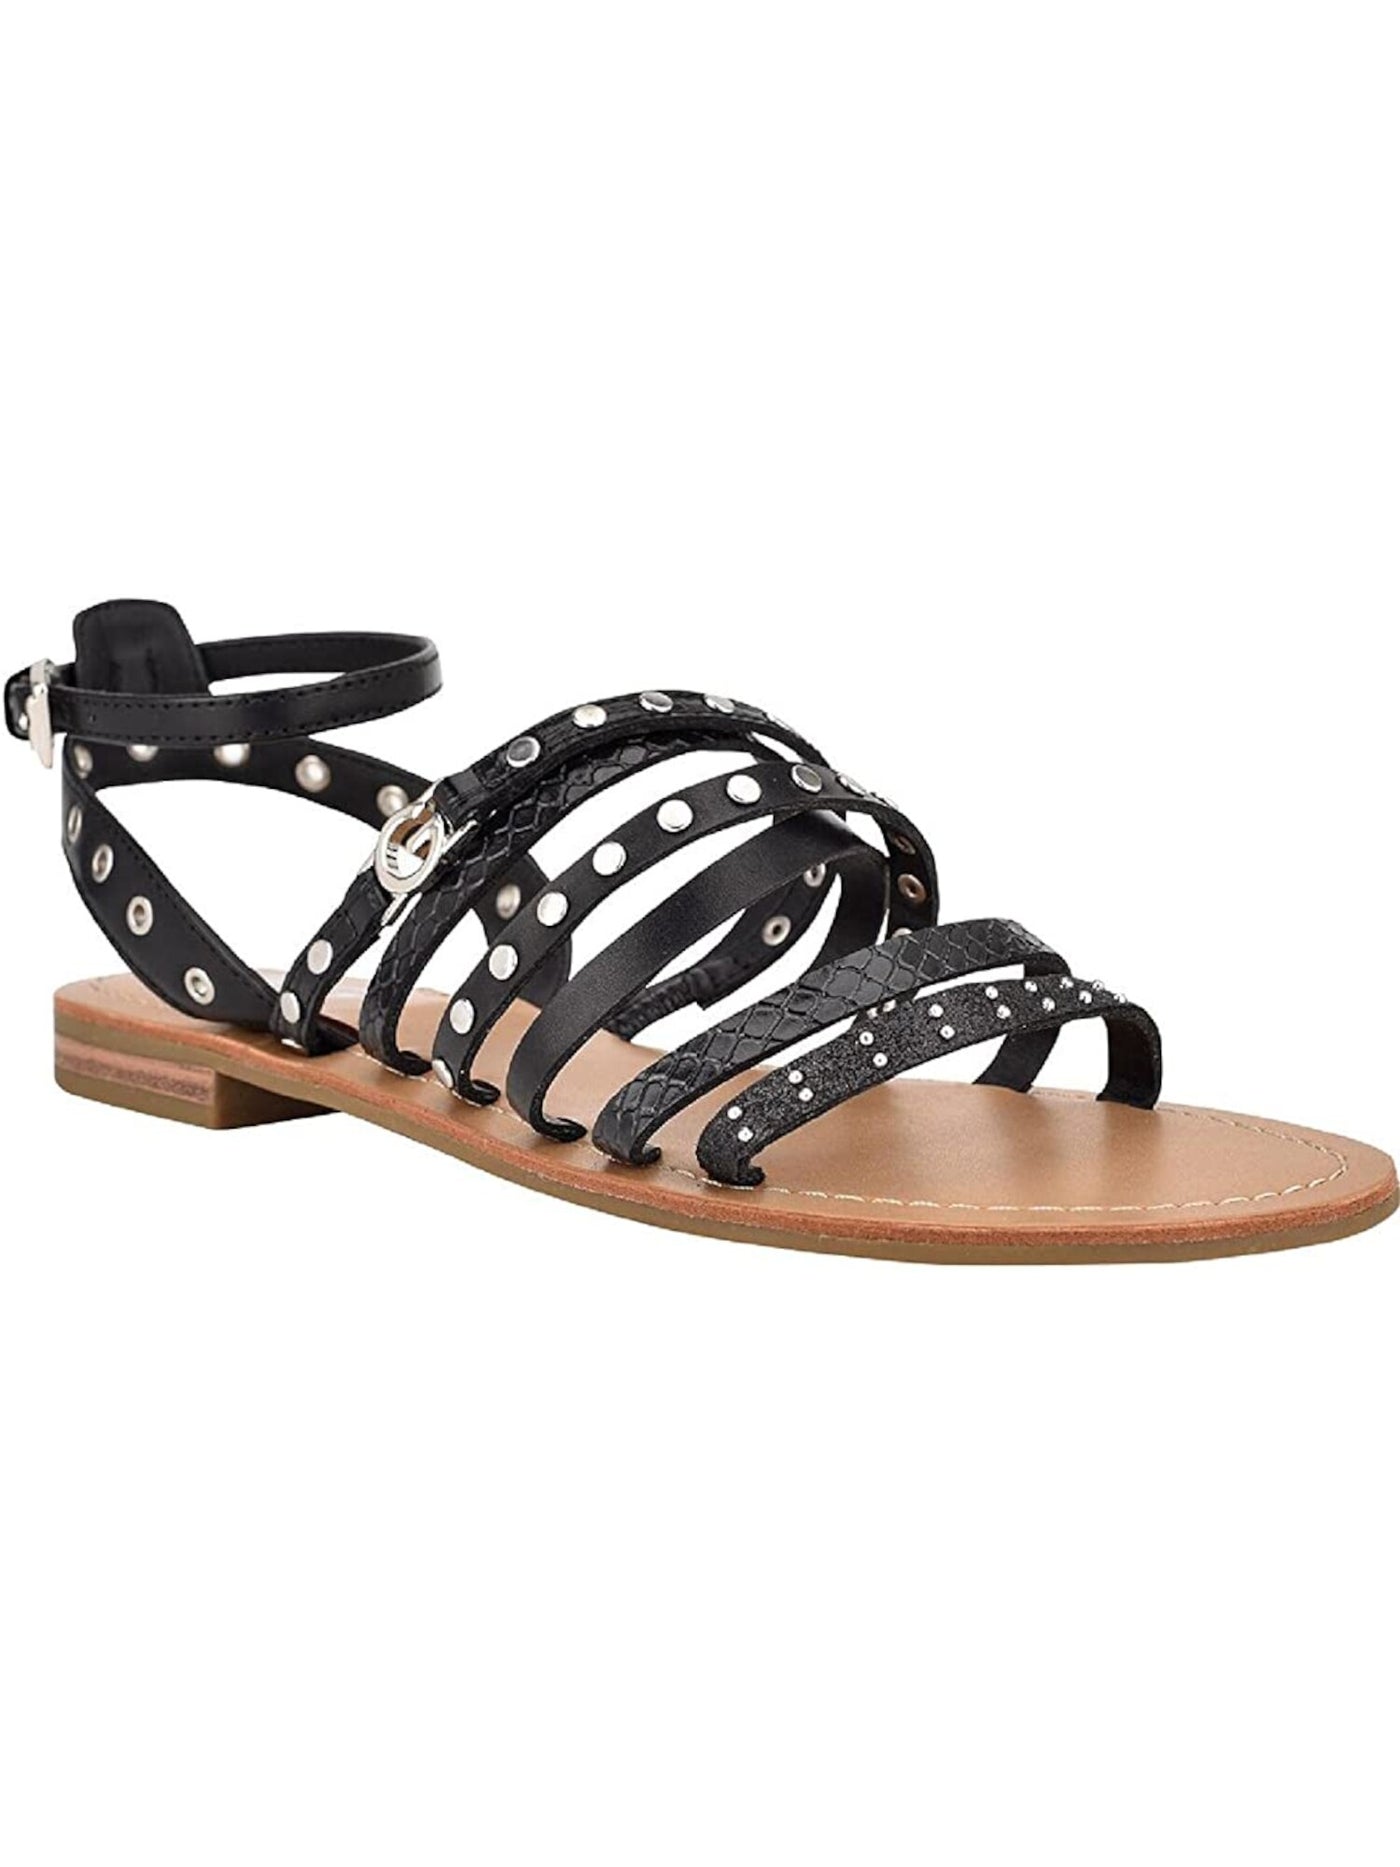 GBG LOS ANGELES Womens Black Adjustable Strap G-Logo Studded Strappy Hoko Round Toe Buckle Sandals Shoes 5.5 M